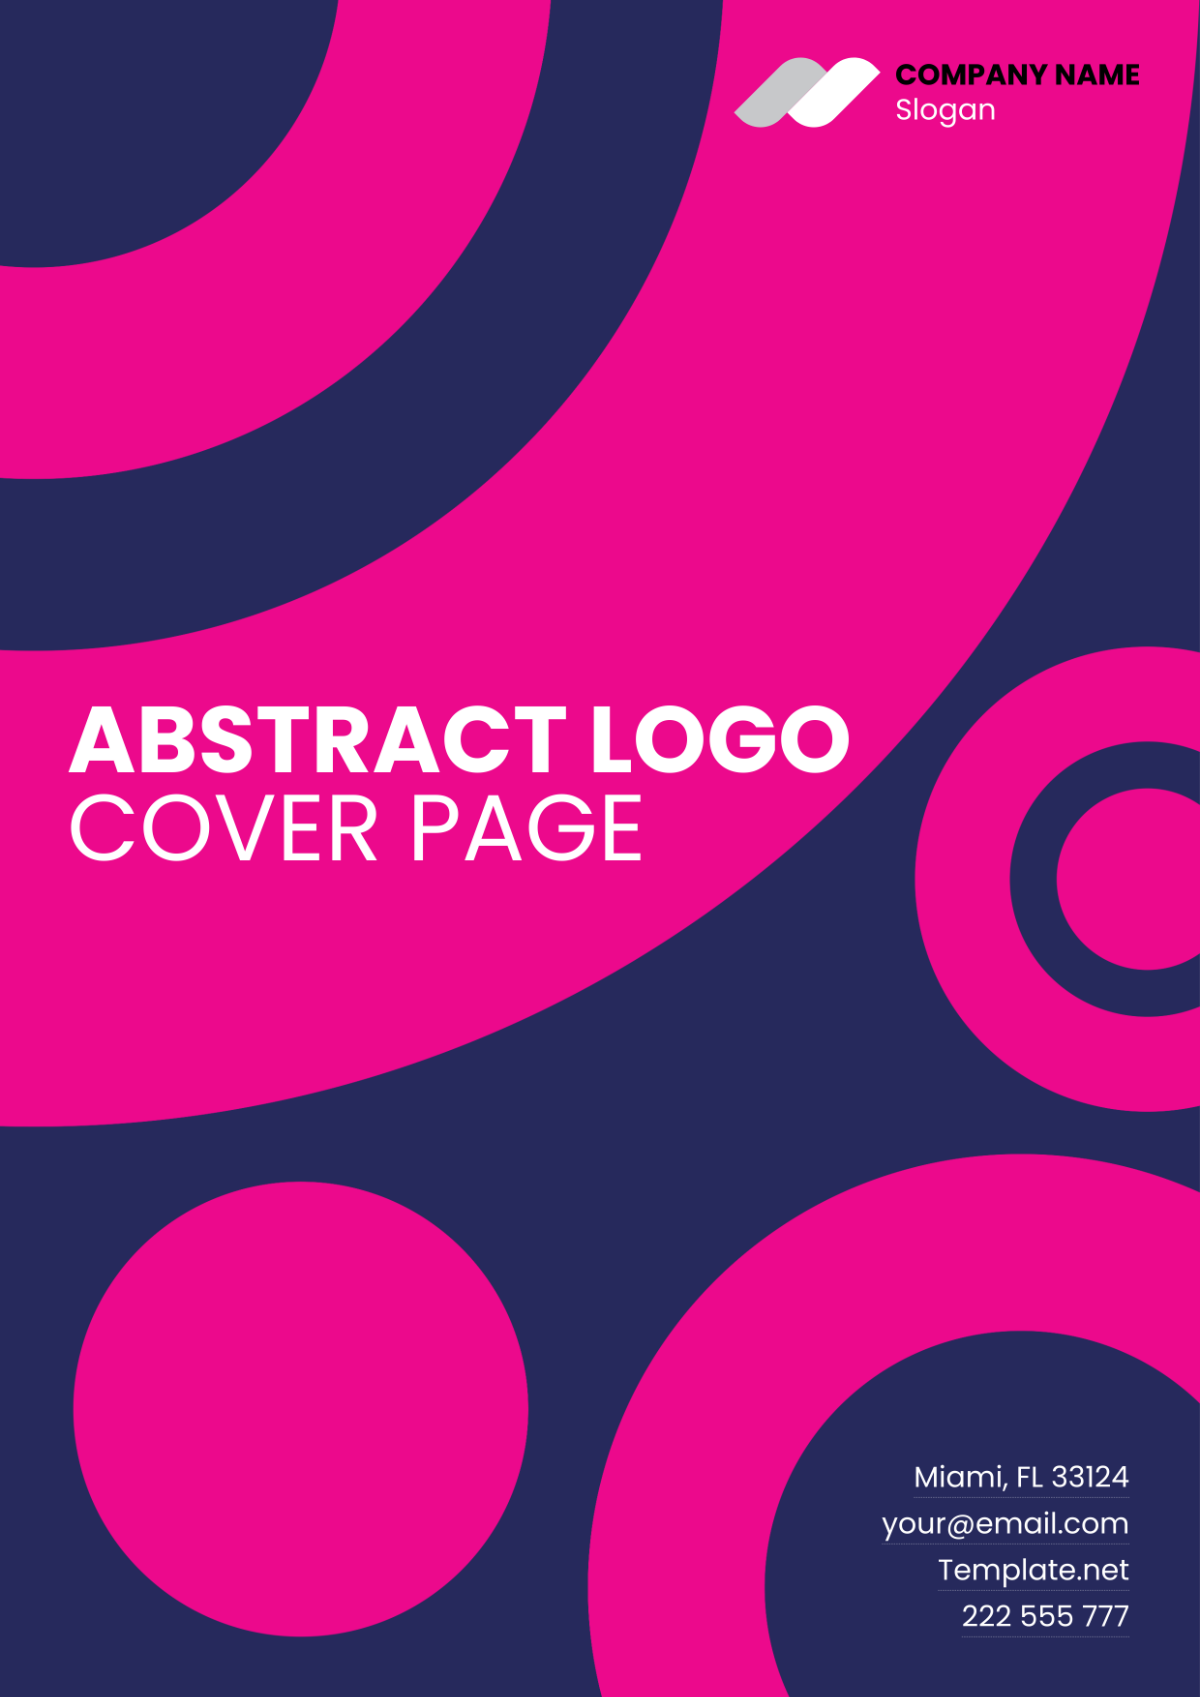 Abstract Logo Cover Page